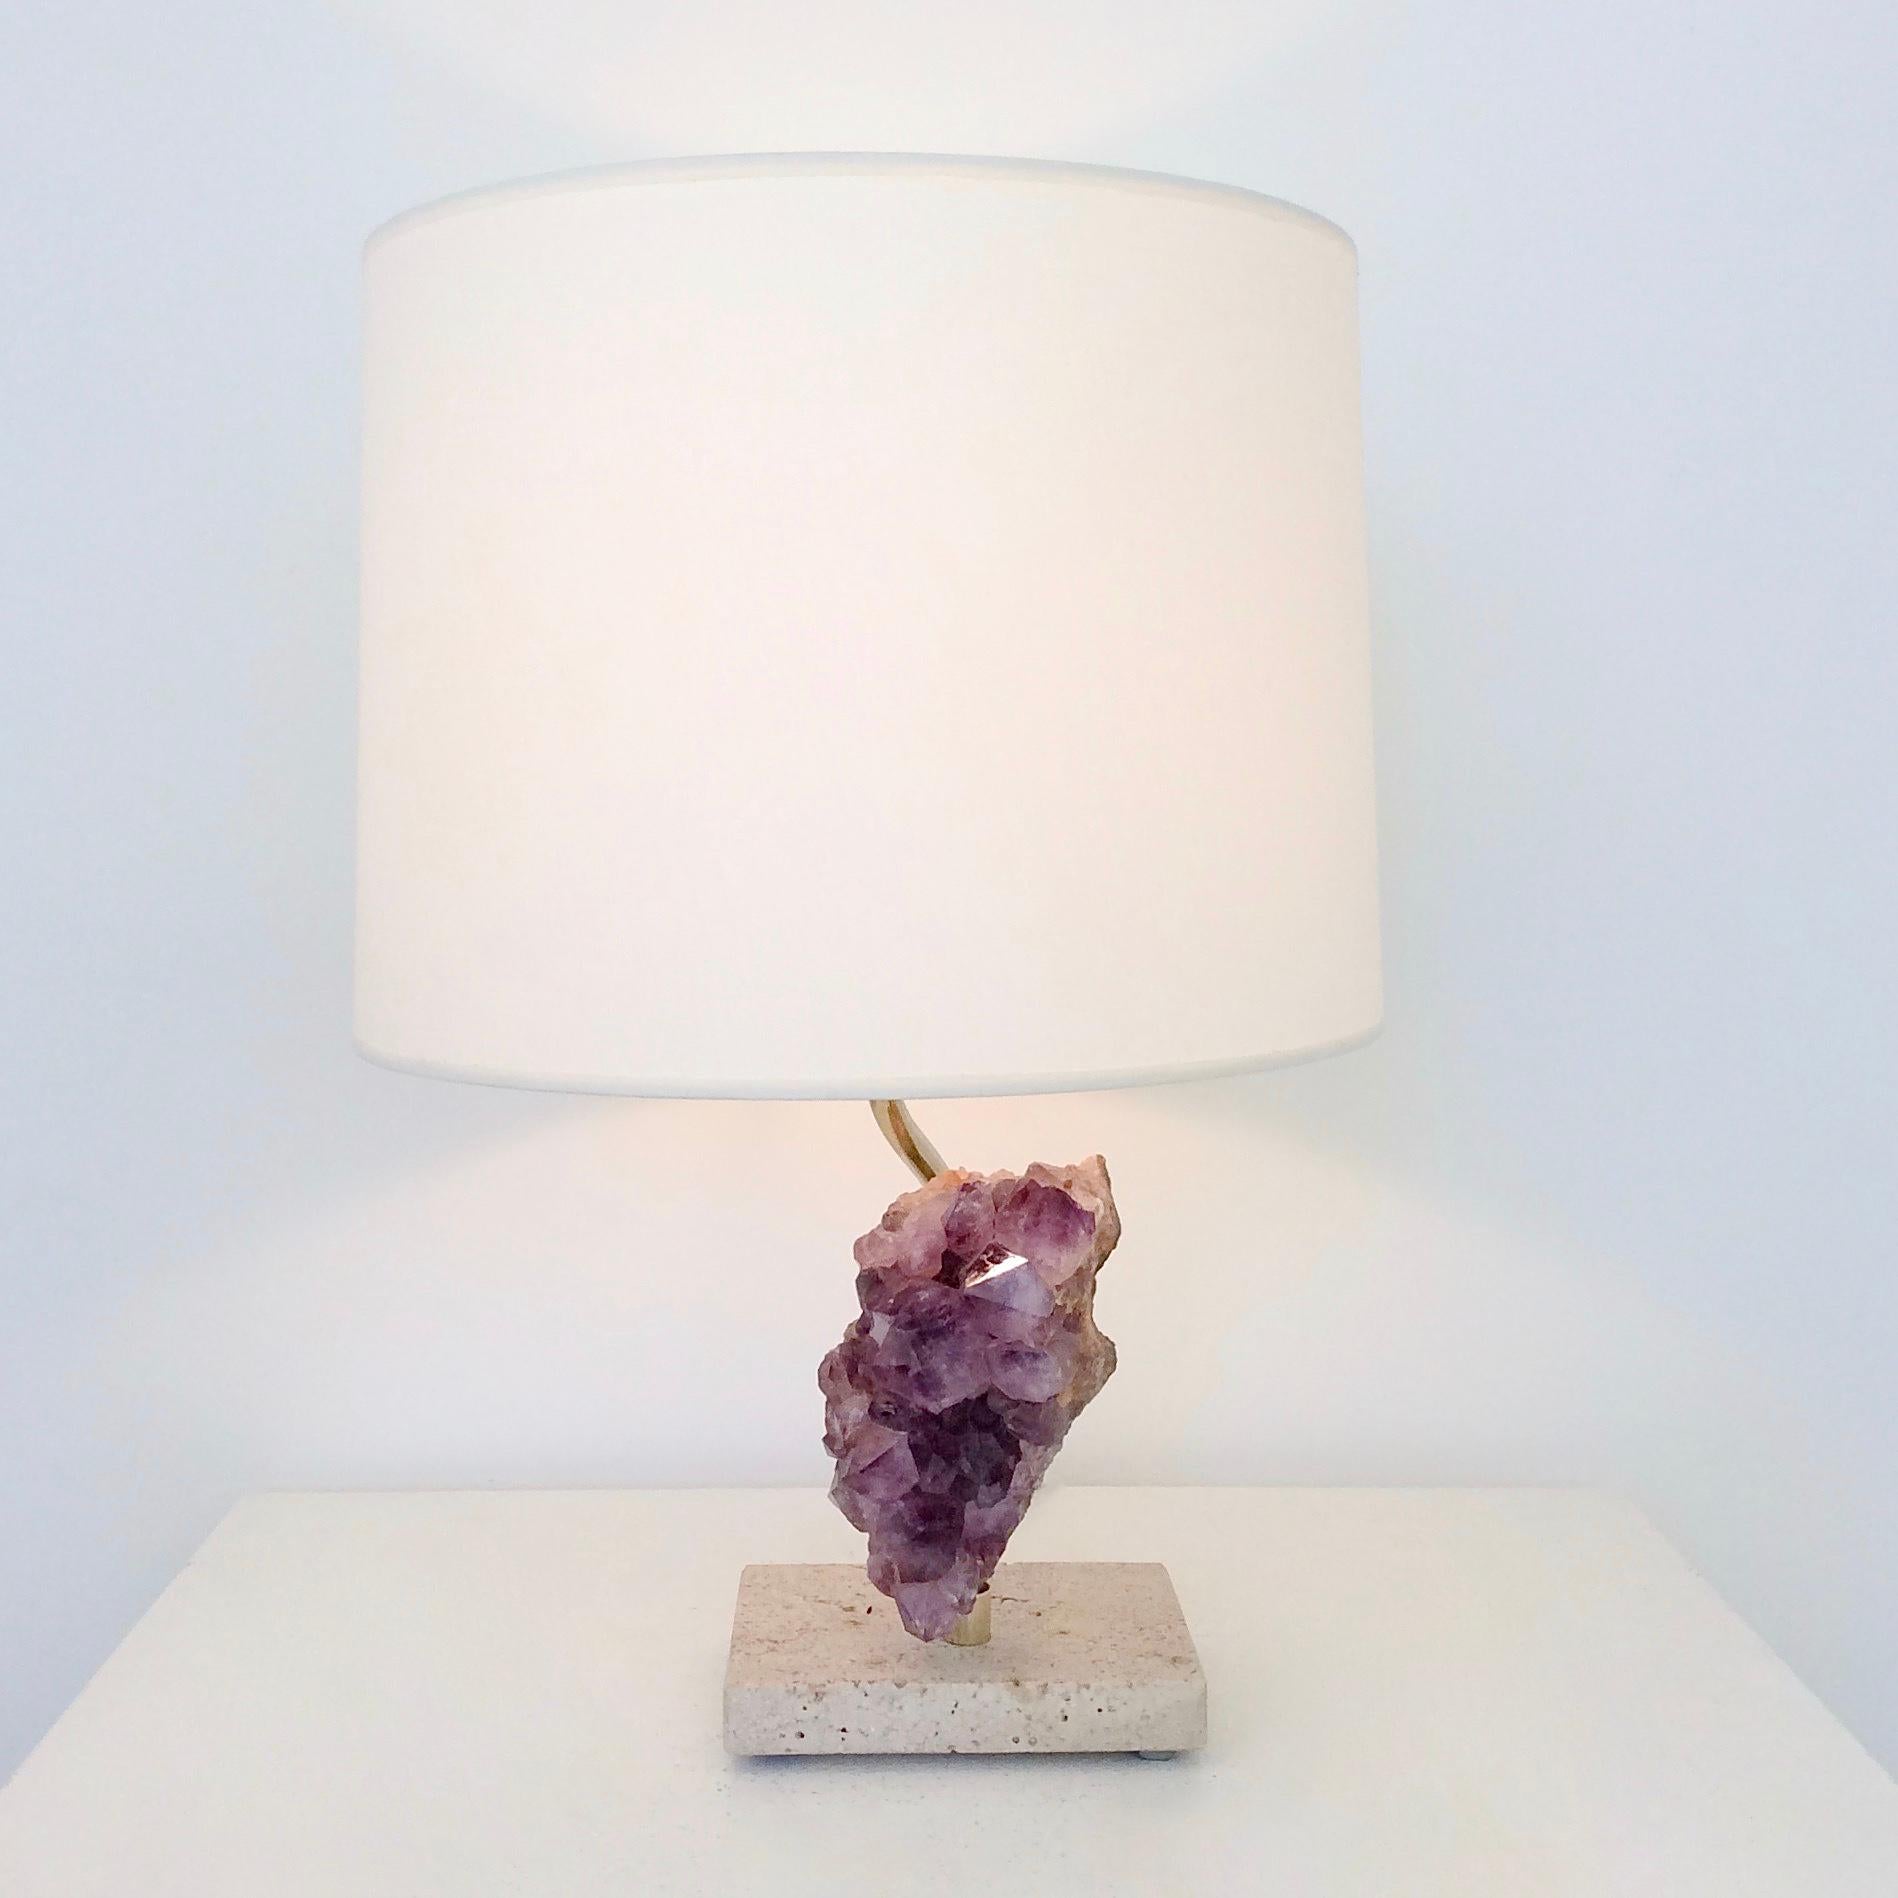 Amethyst rock table lamp, circa 1970, Belgium.
Amethyst, travertine base, brass and new white fabric shade.
One E27 bulb of 40 W.
Dimensions: 40 cm H, travertine base: 13 x 9 cm, diameter of the shade: 28 cm.
Good condition.
All purchases are